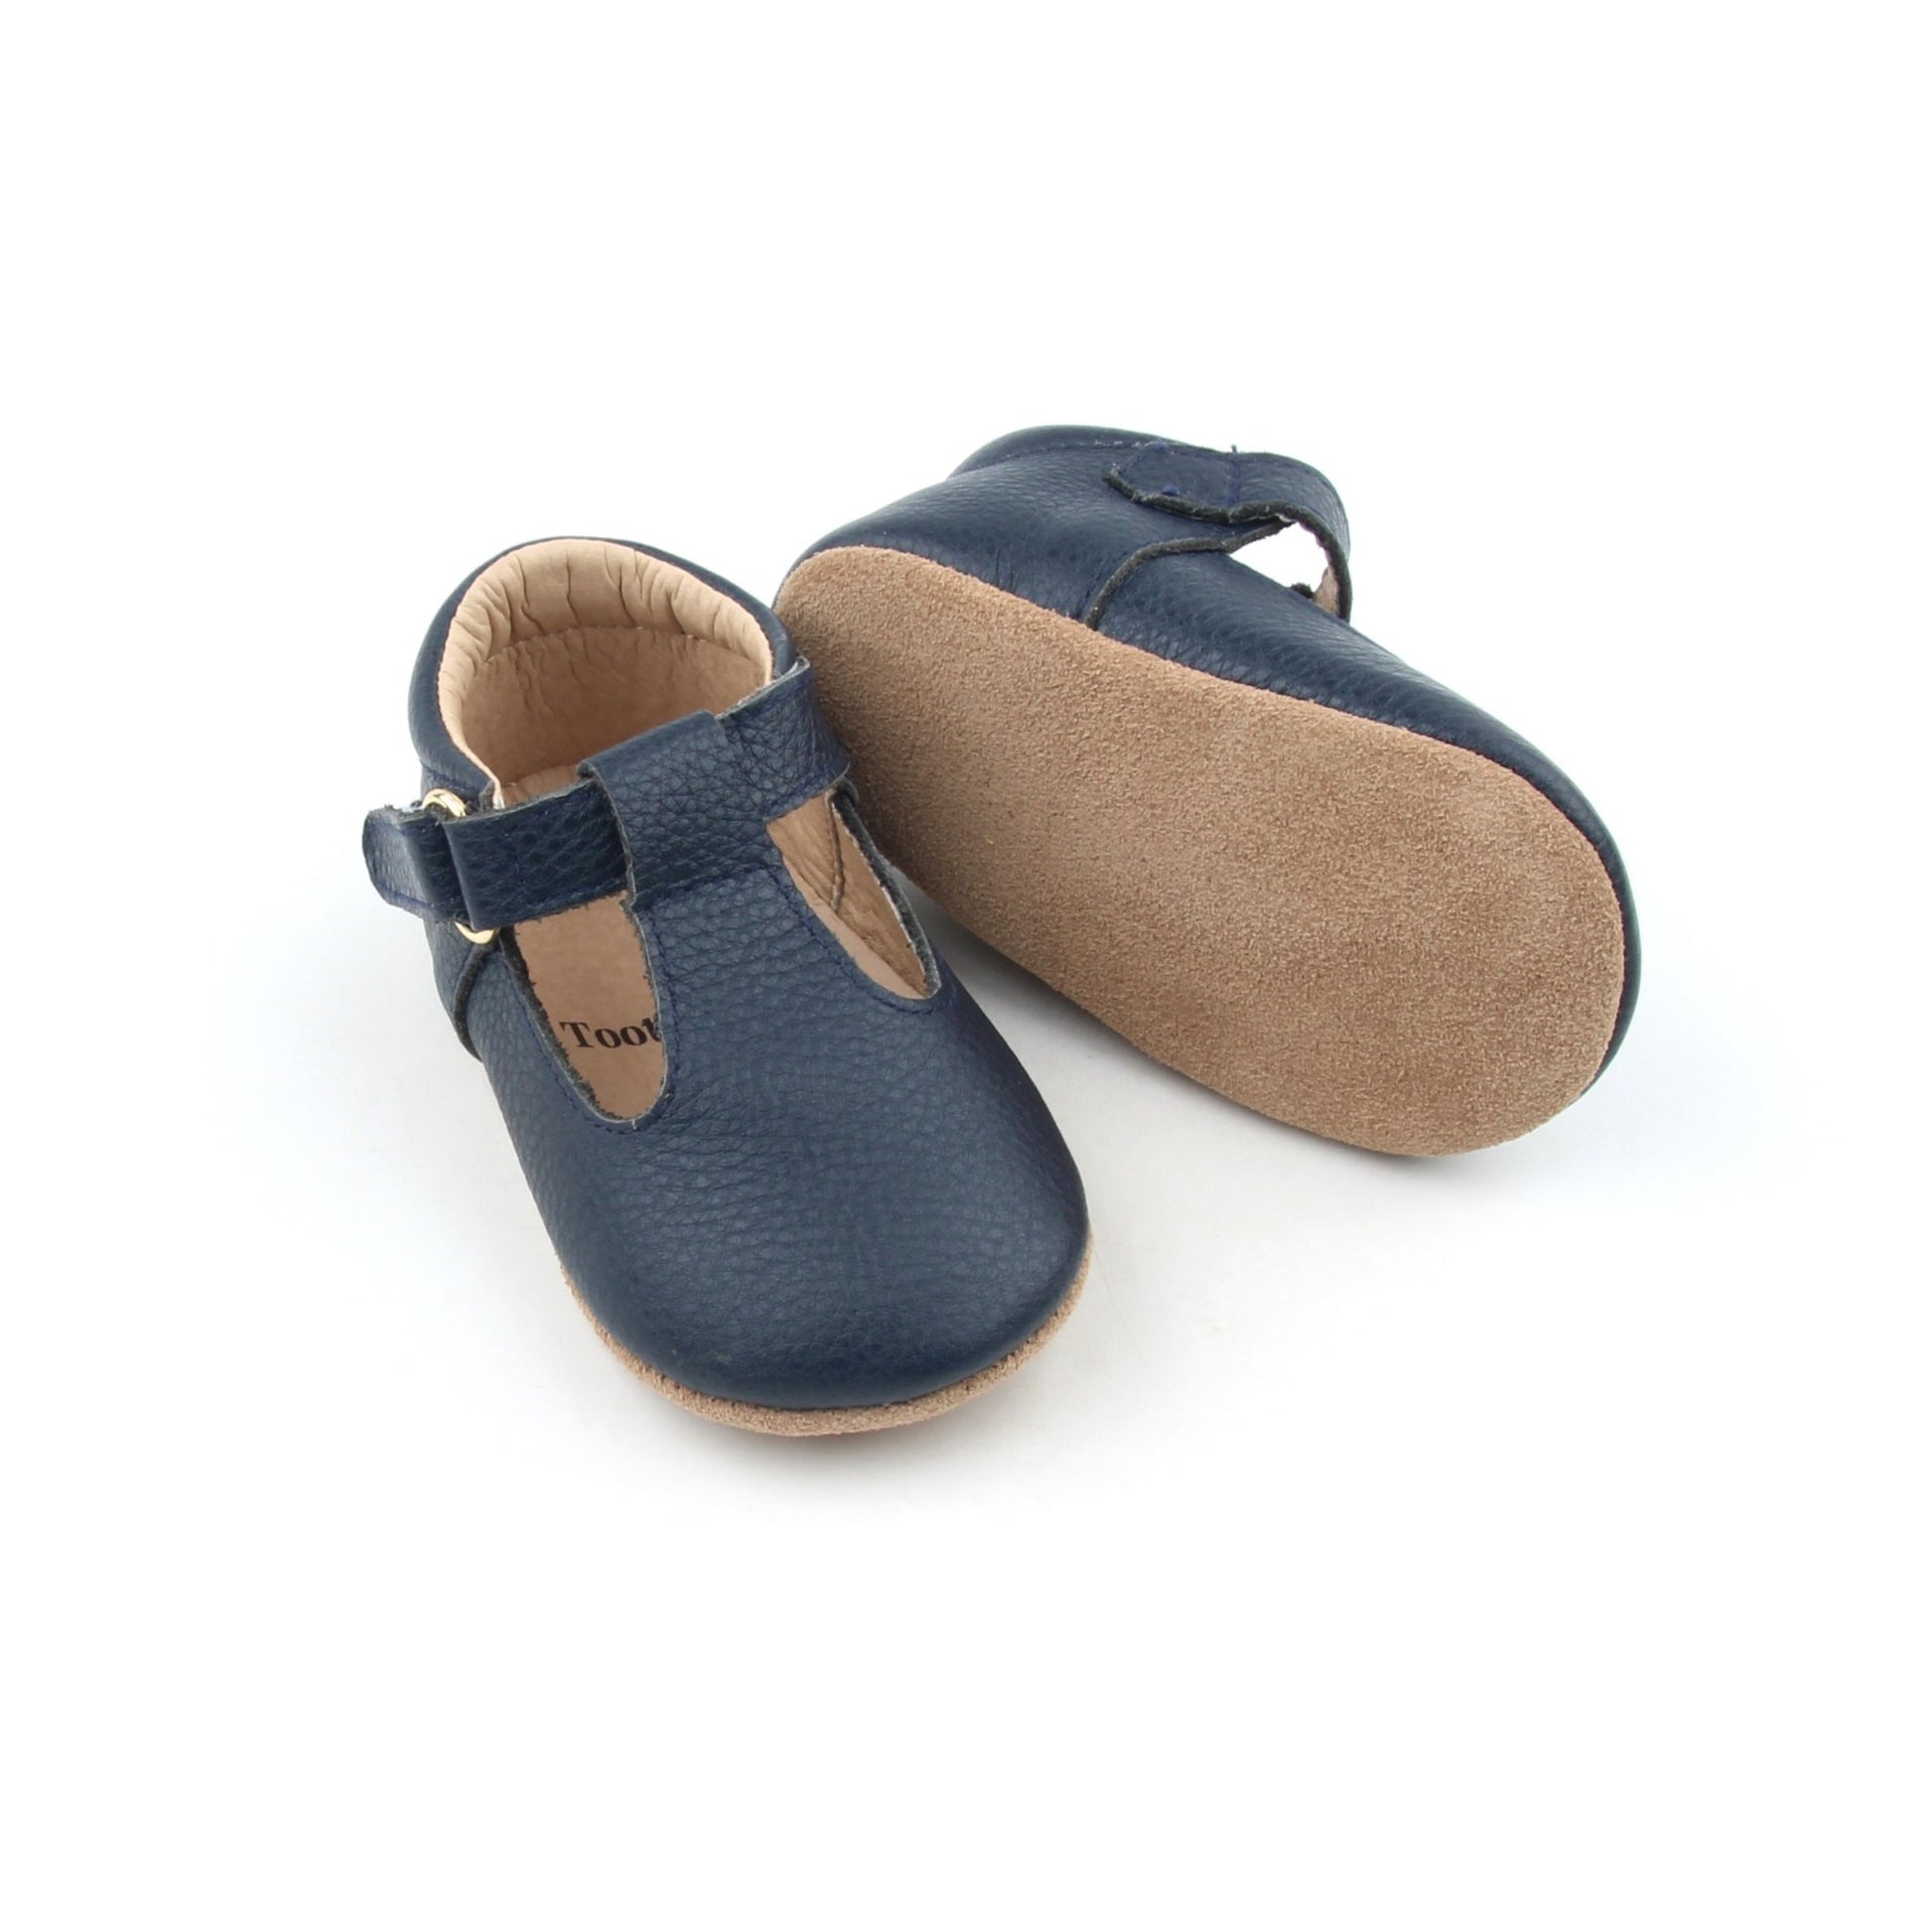 Navy T-bar shoes - Toots Kids